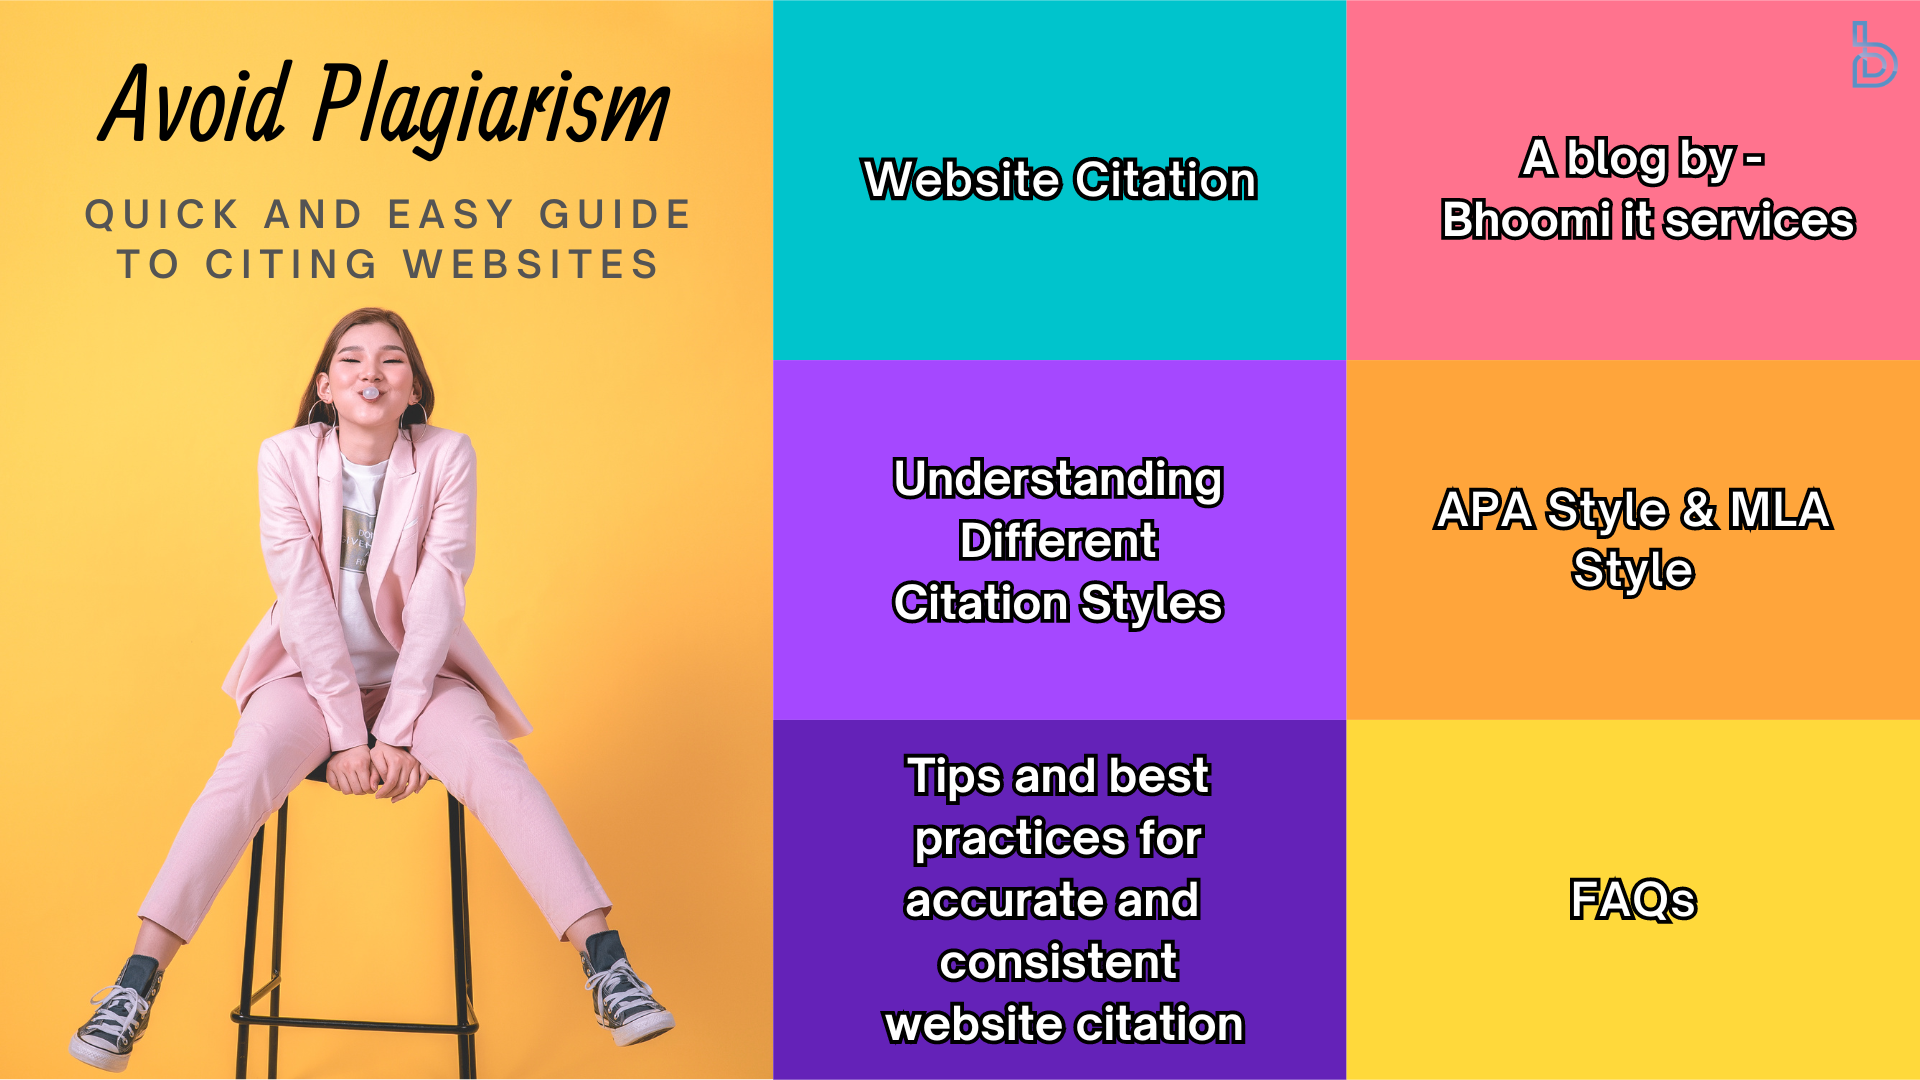 Avoid Plagiarism: Quick and Easy Guide to Citing Websites